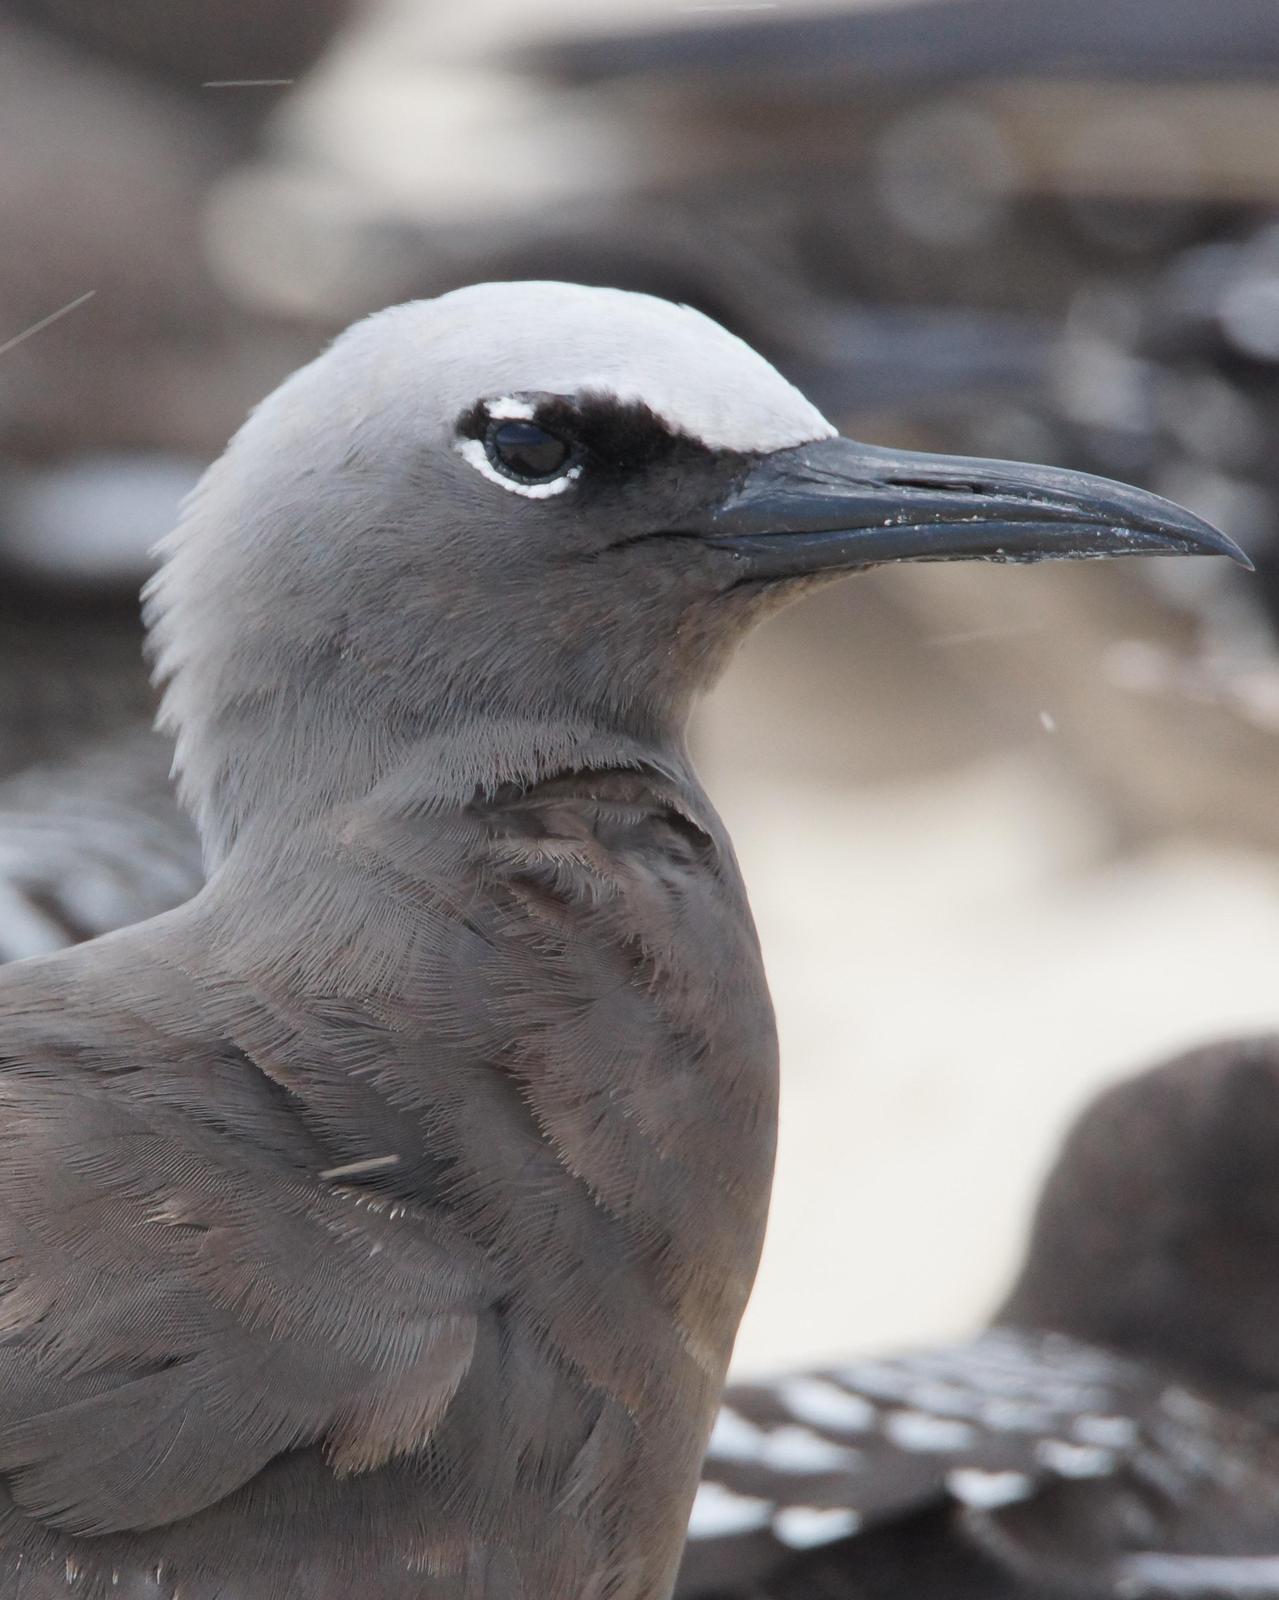 Brown Noddy Photo by Steve Percival